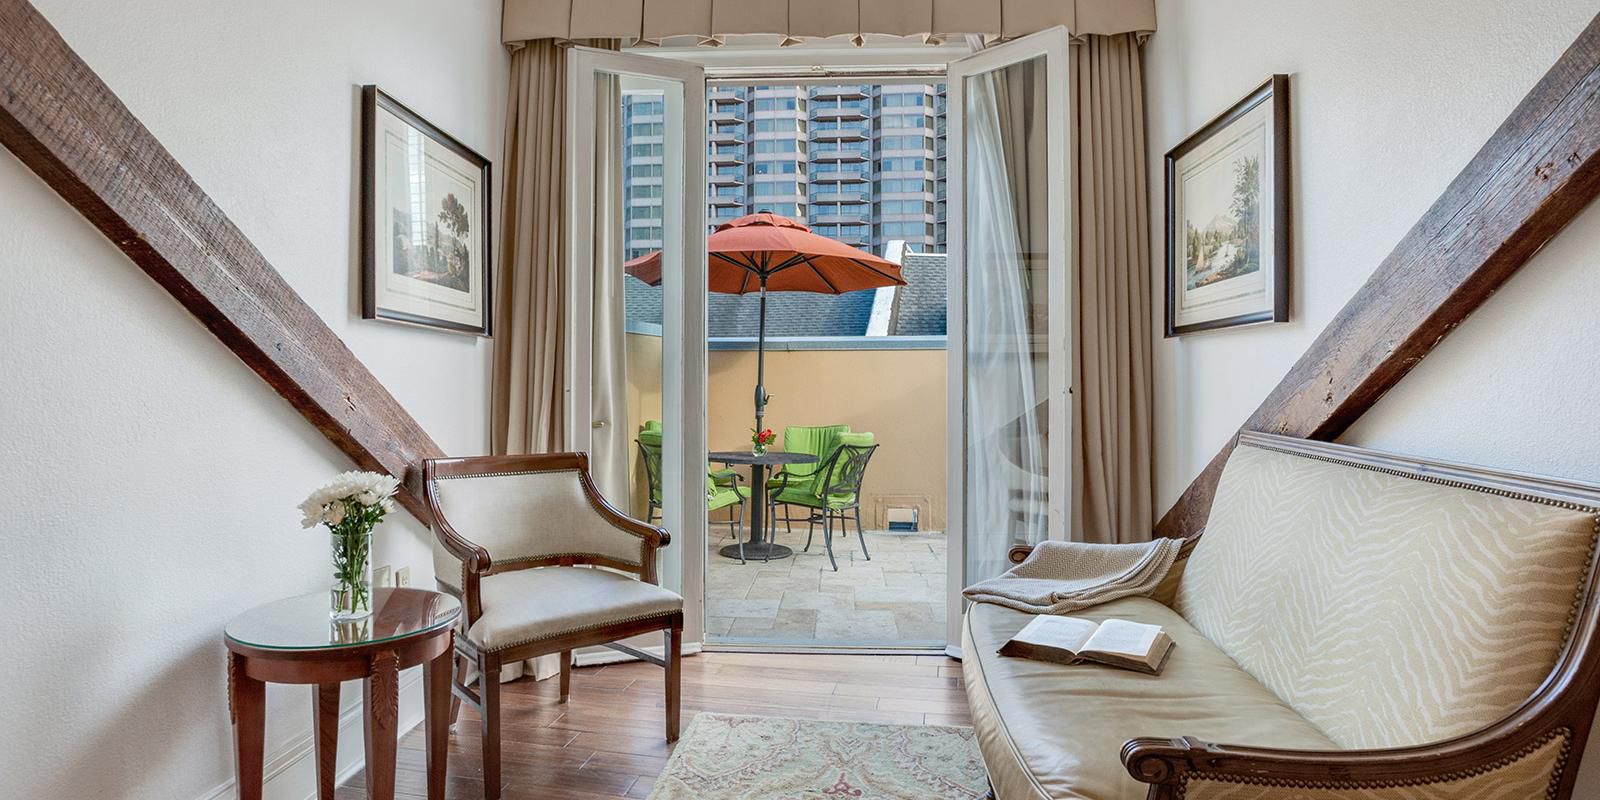 Just steps from the Arts District, St. James Hotel is the perfect place to relax and unwind from your travels. Admire the fusion of French-inspired buildings and modern skyscrapers from your hotel room with a balcony as you sip on simmering coffee in the early morning or after discovering all of New Orleans' hidden gems.
